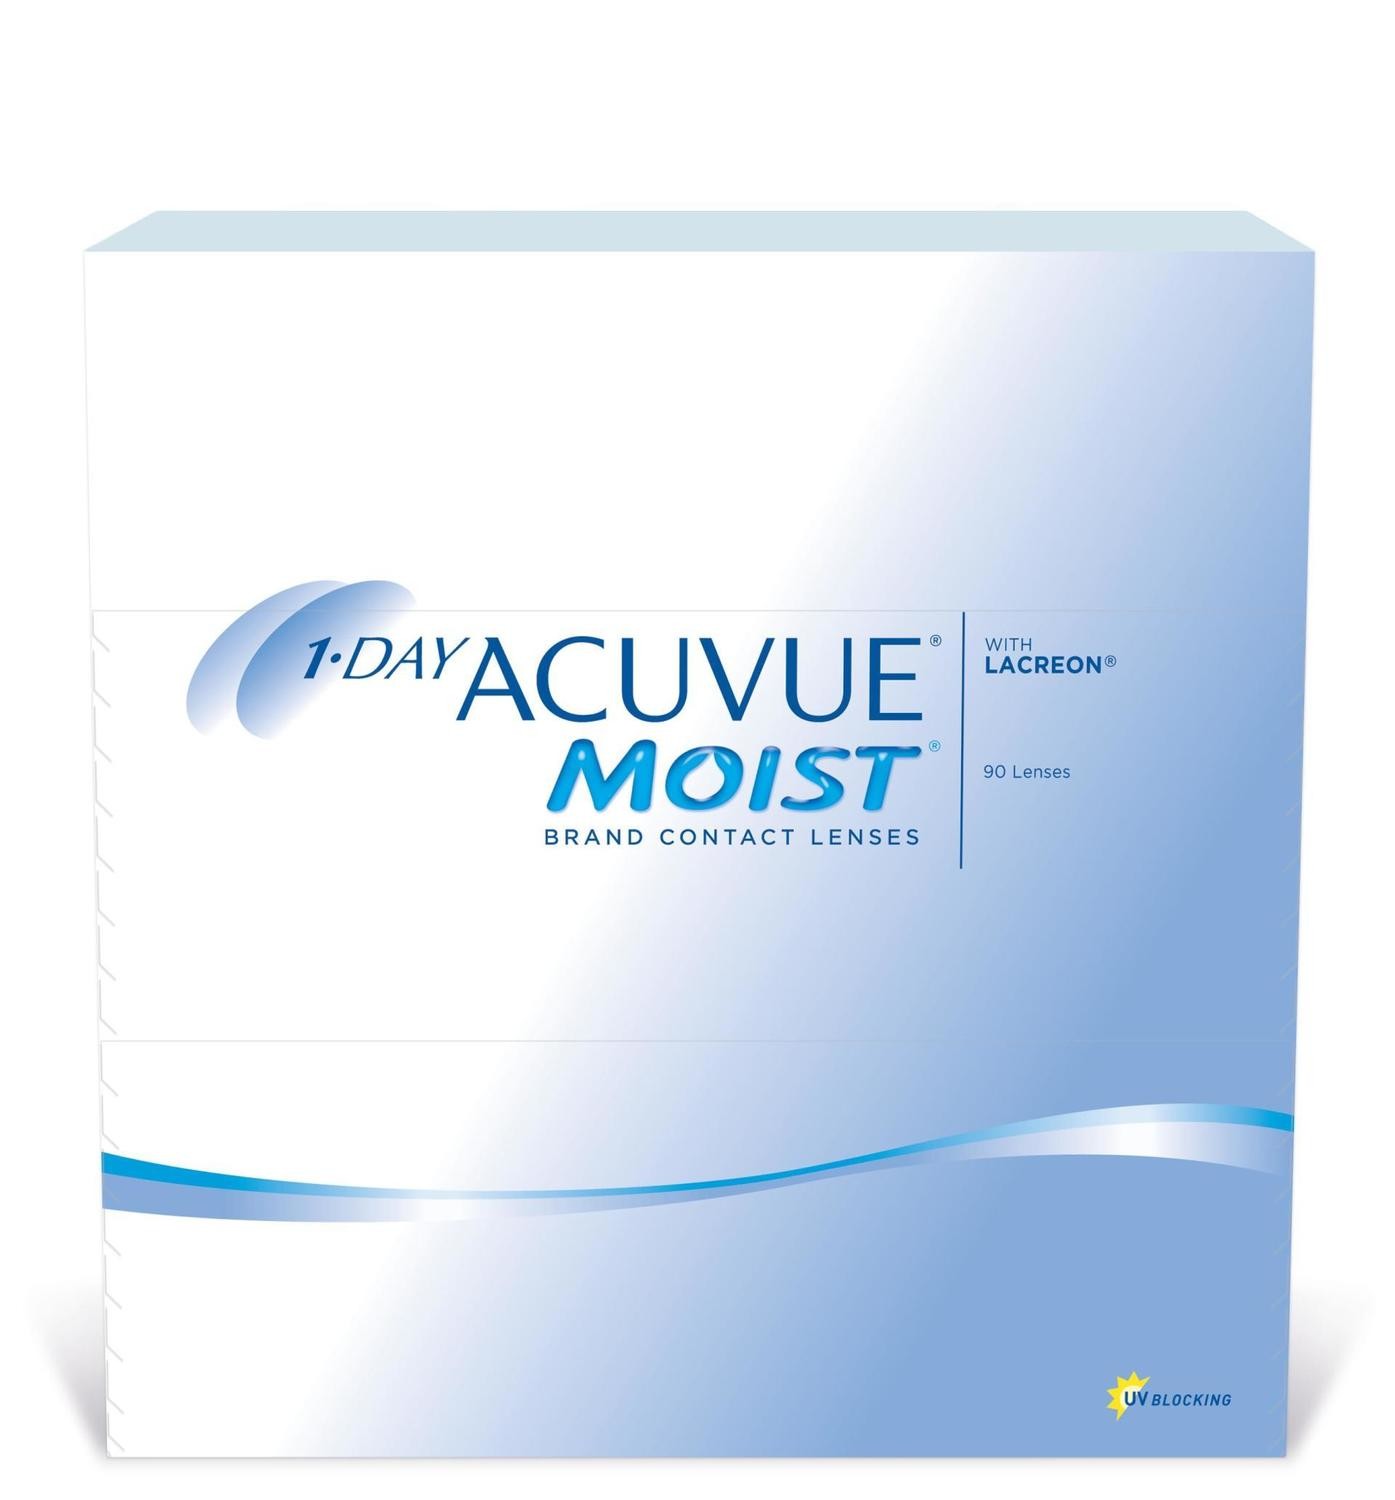 Acuvue Moist 1-Day (90 pack) by Johnson & Johnson